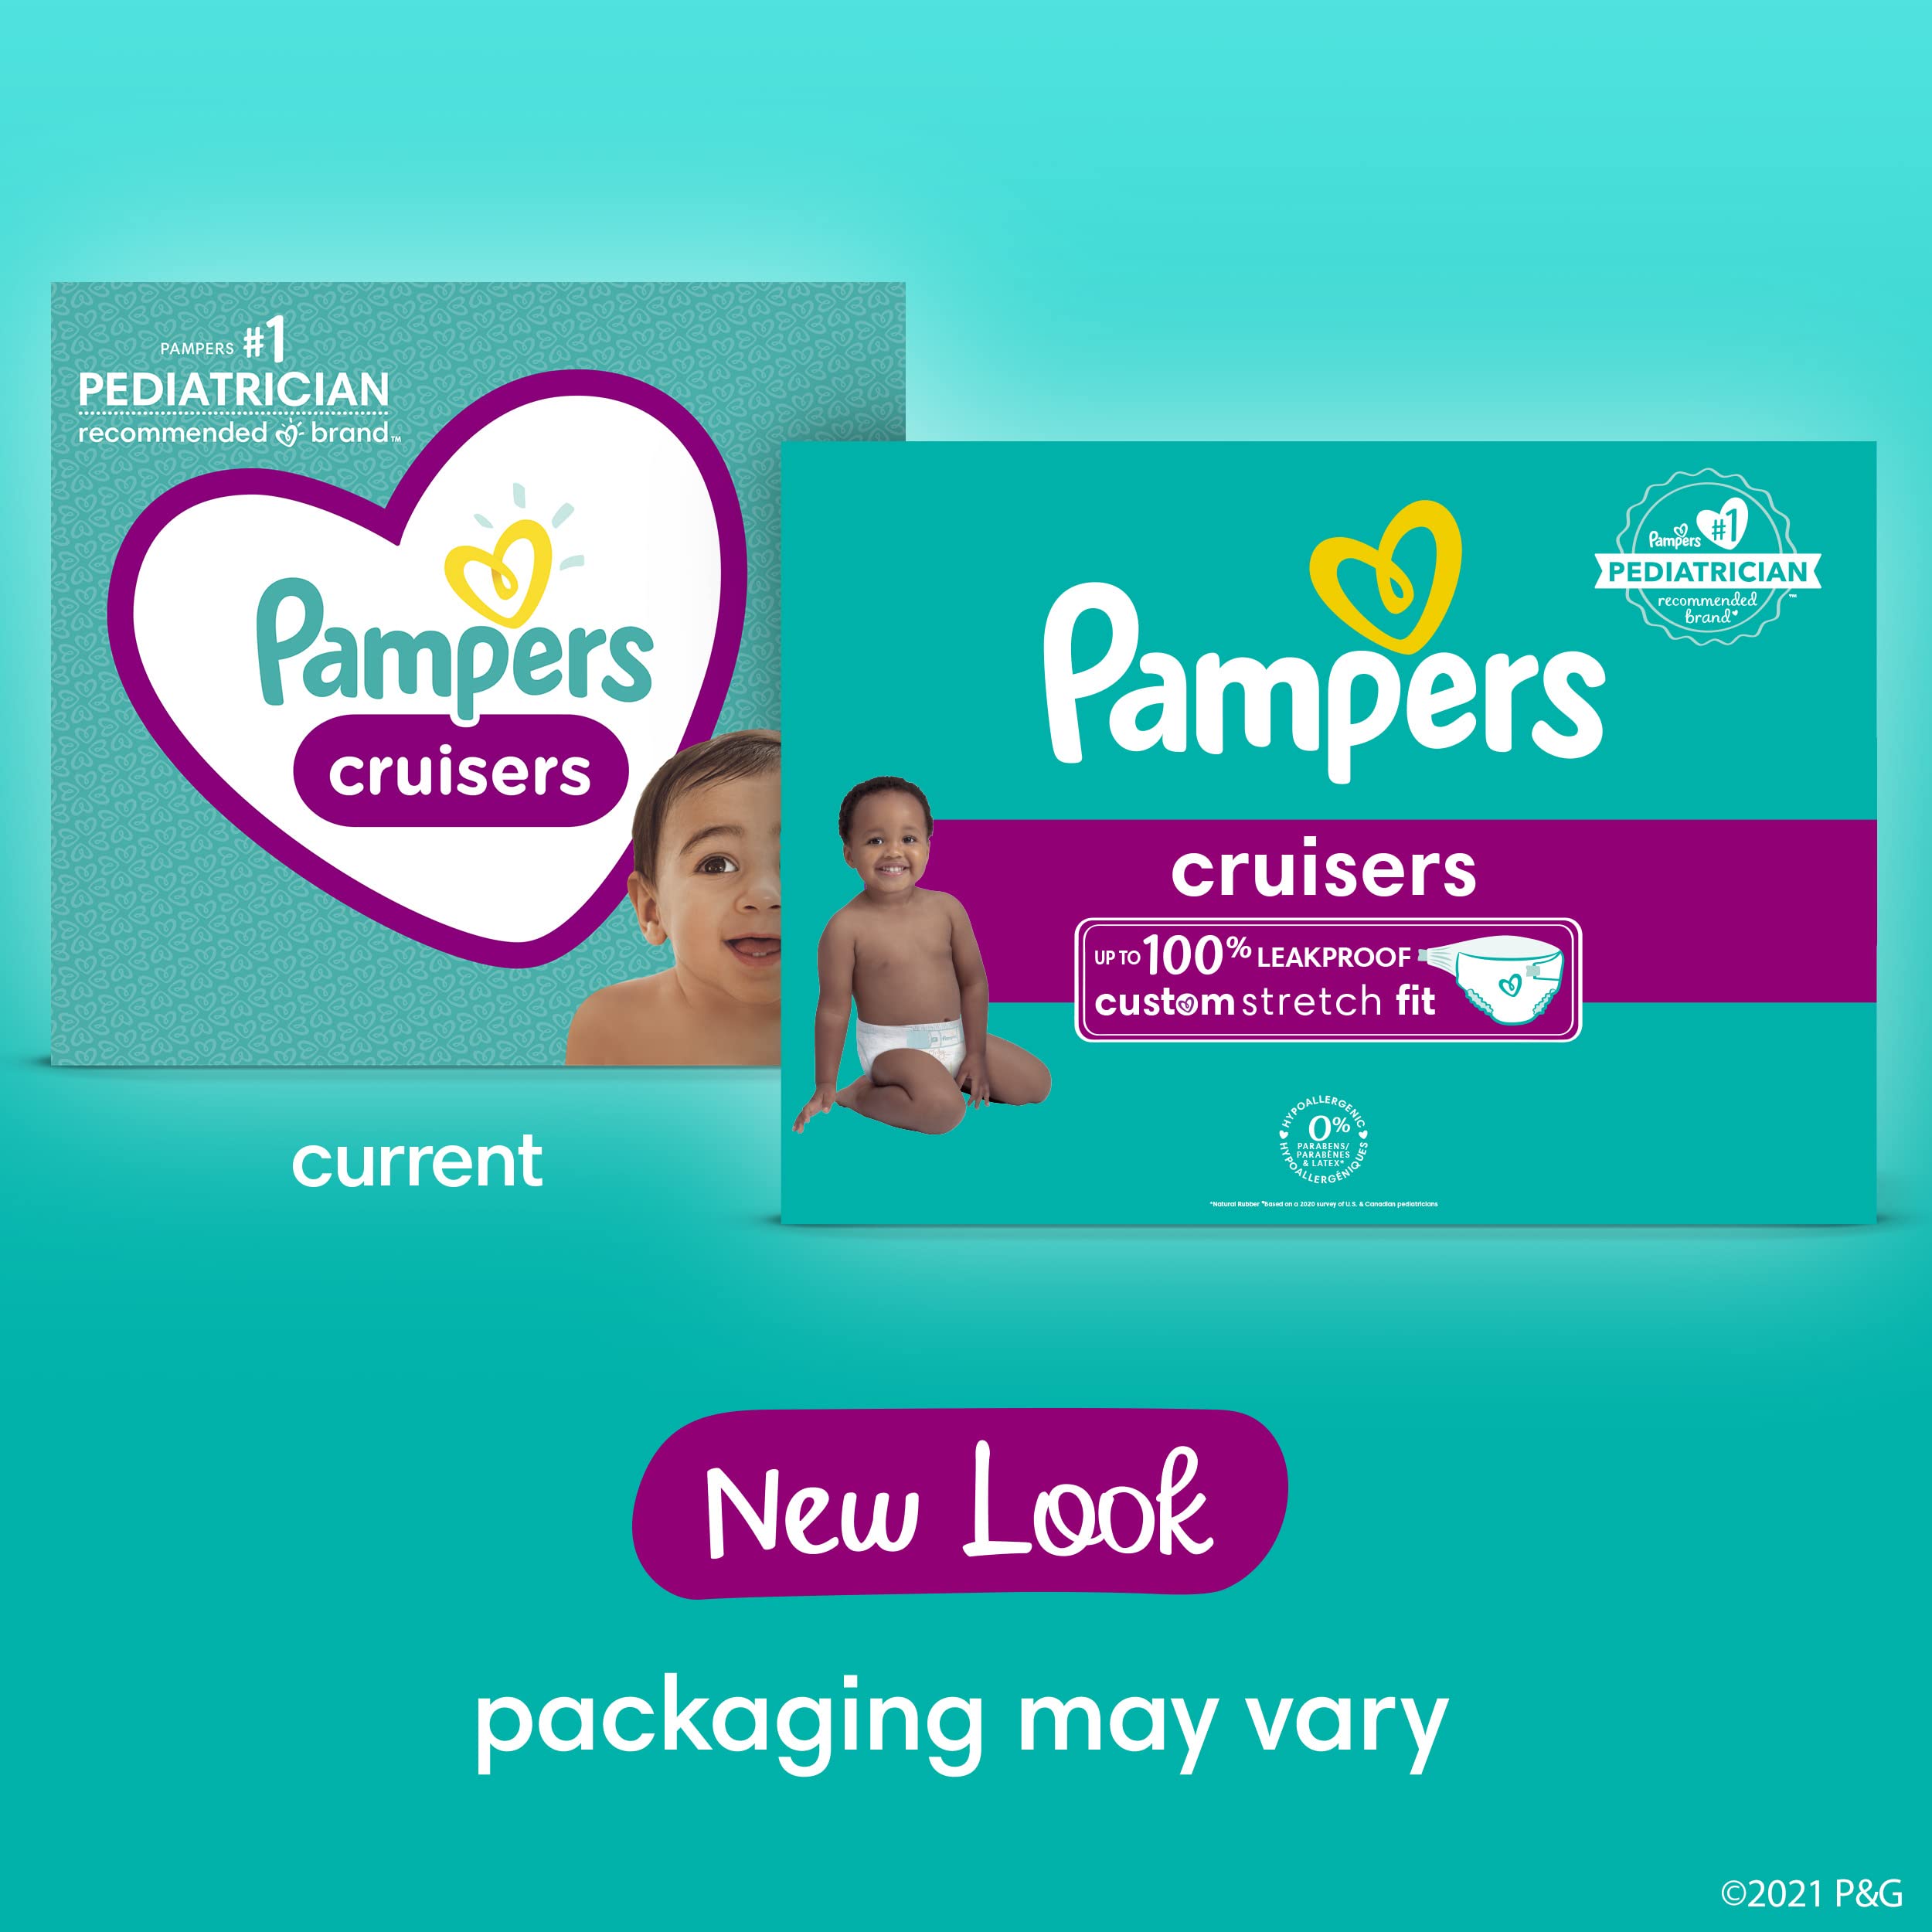 Diapers Size 5, 128 Count - Pampers Cruisers Disposable Baby Diapers, (Packaging May Vary)